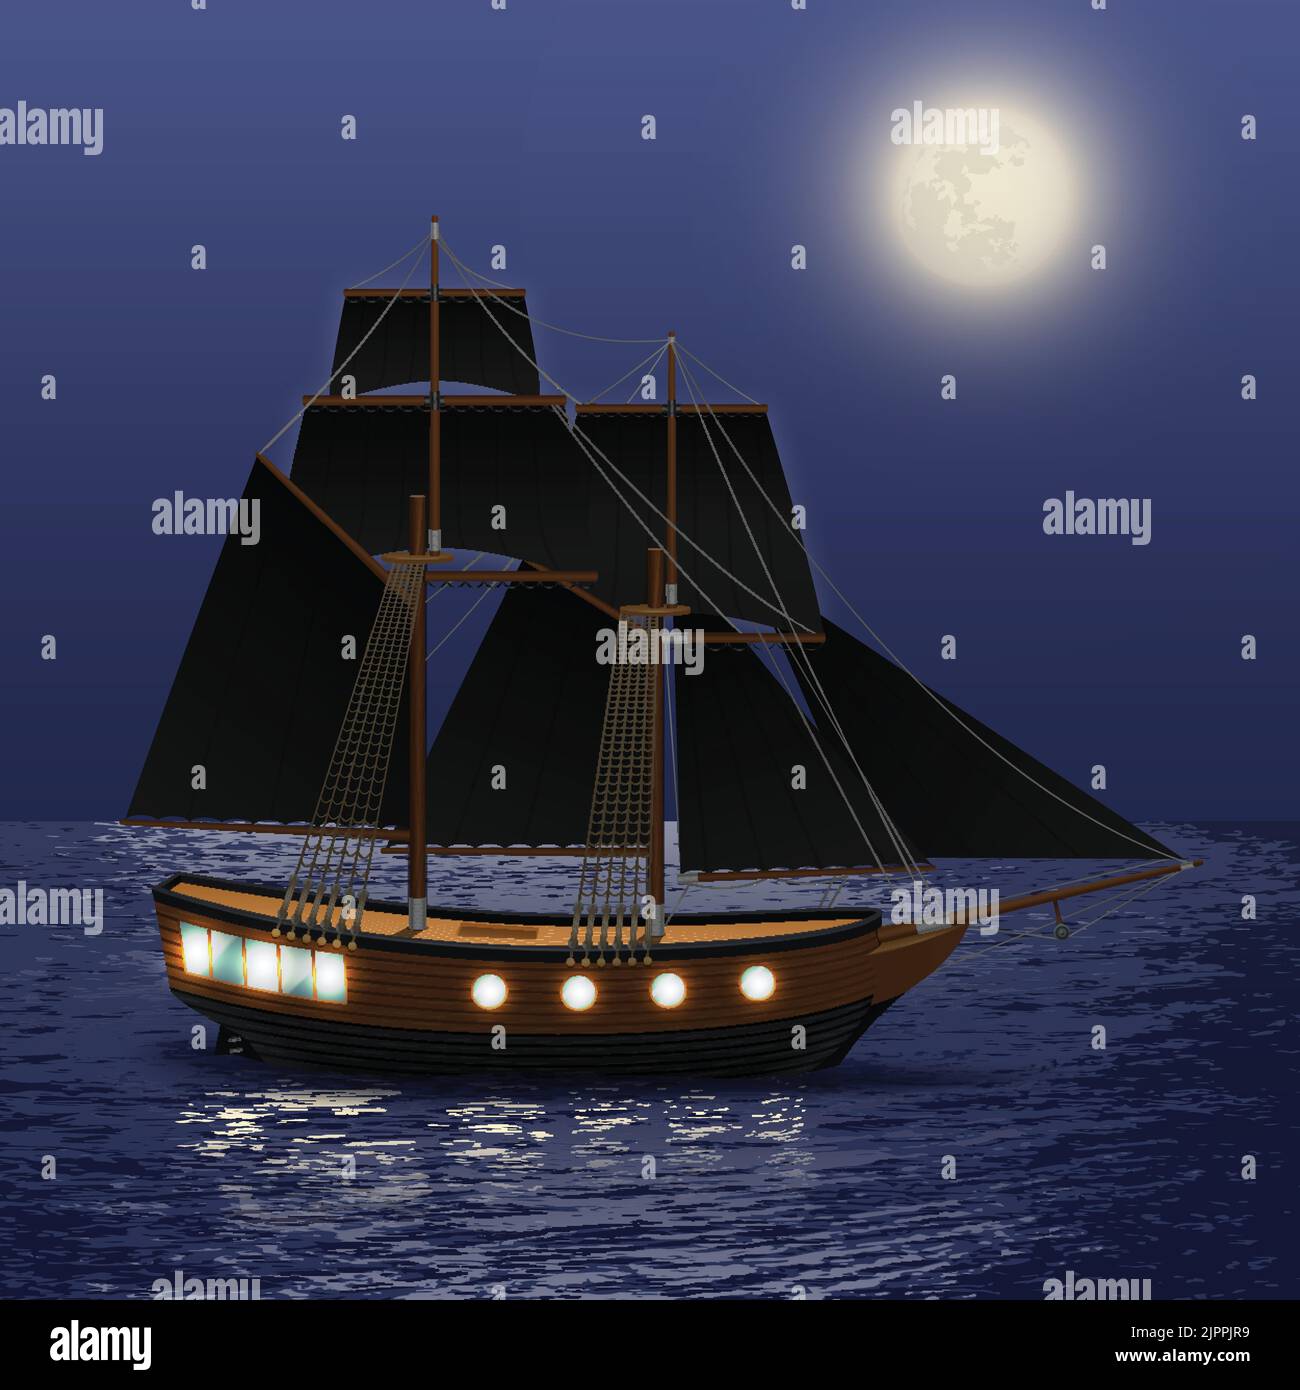 Vintage ship with black sails at night sea background vector illustration Stock Vector